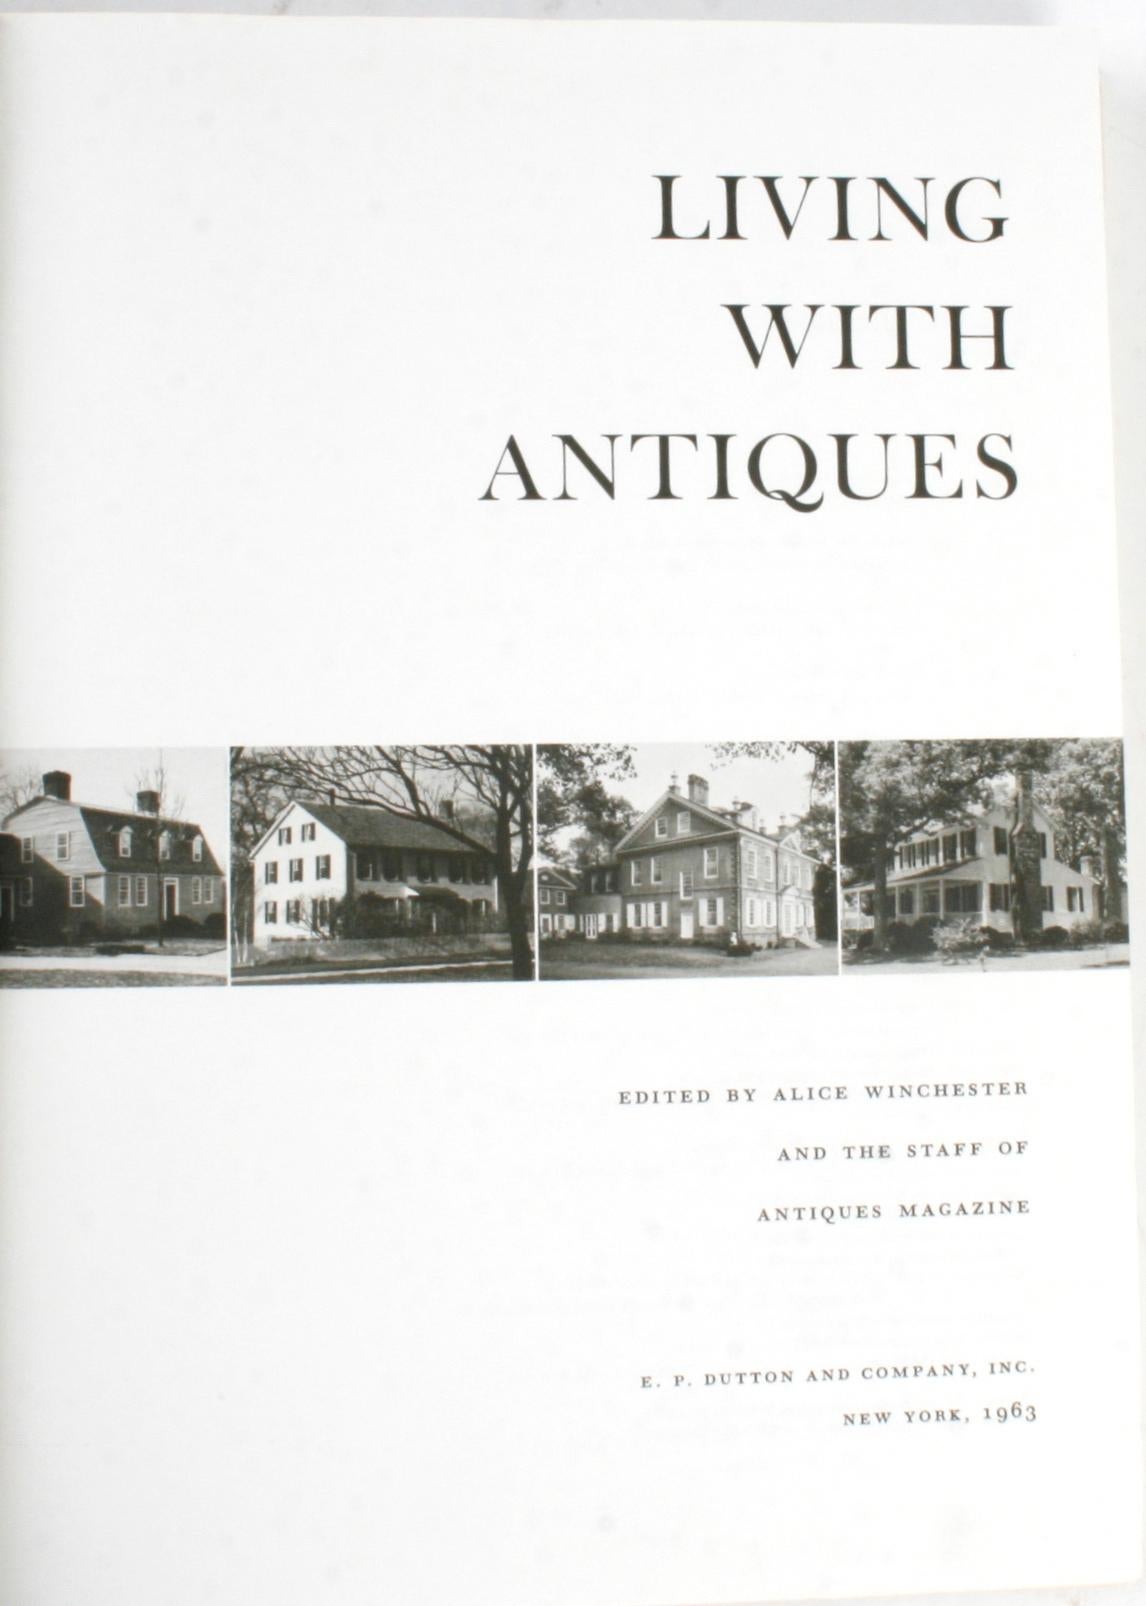 Living With Antiques, A Treasury of Private Homes in America. New York: Straight Enterprises, Inc., 1963. Hardcover with dust jacket. 288pp. A book by Alice Winchester and the staff of 